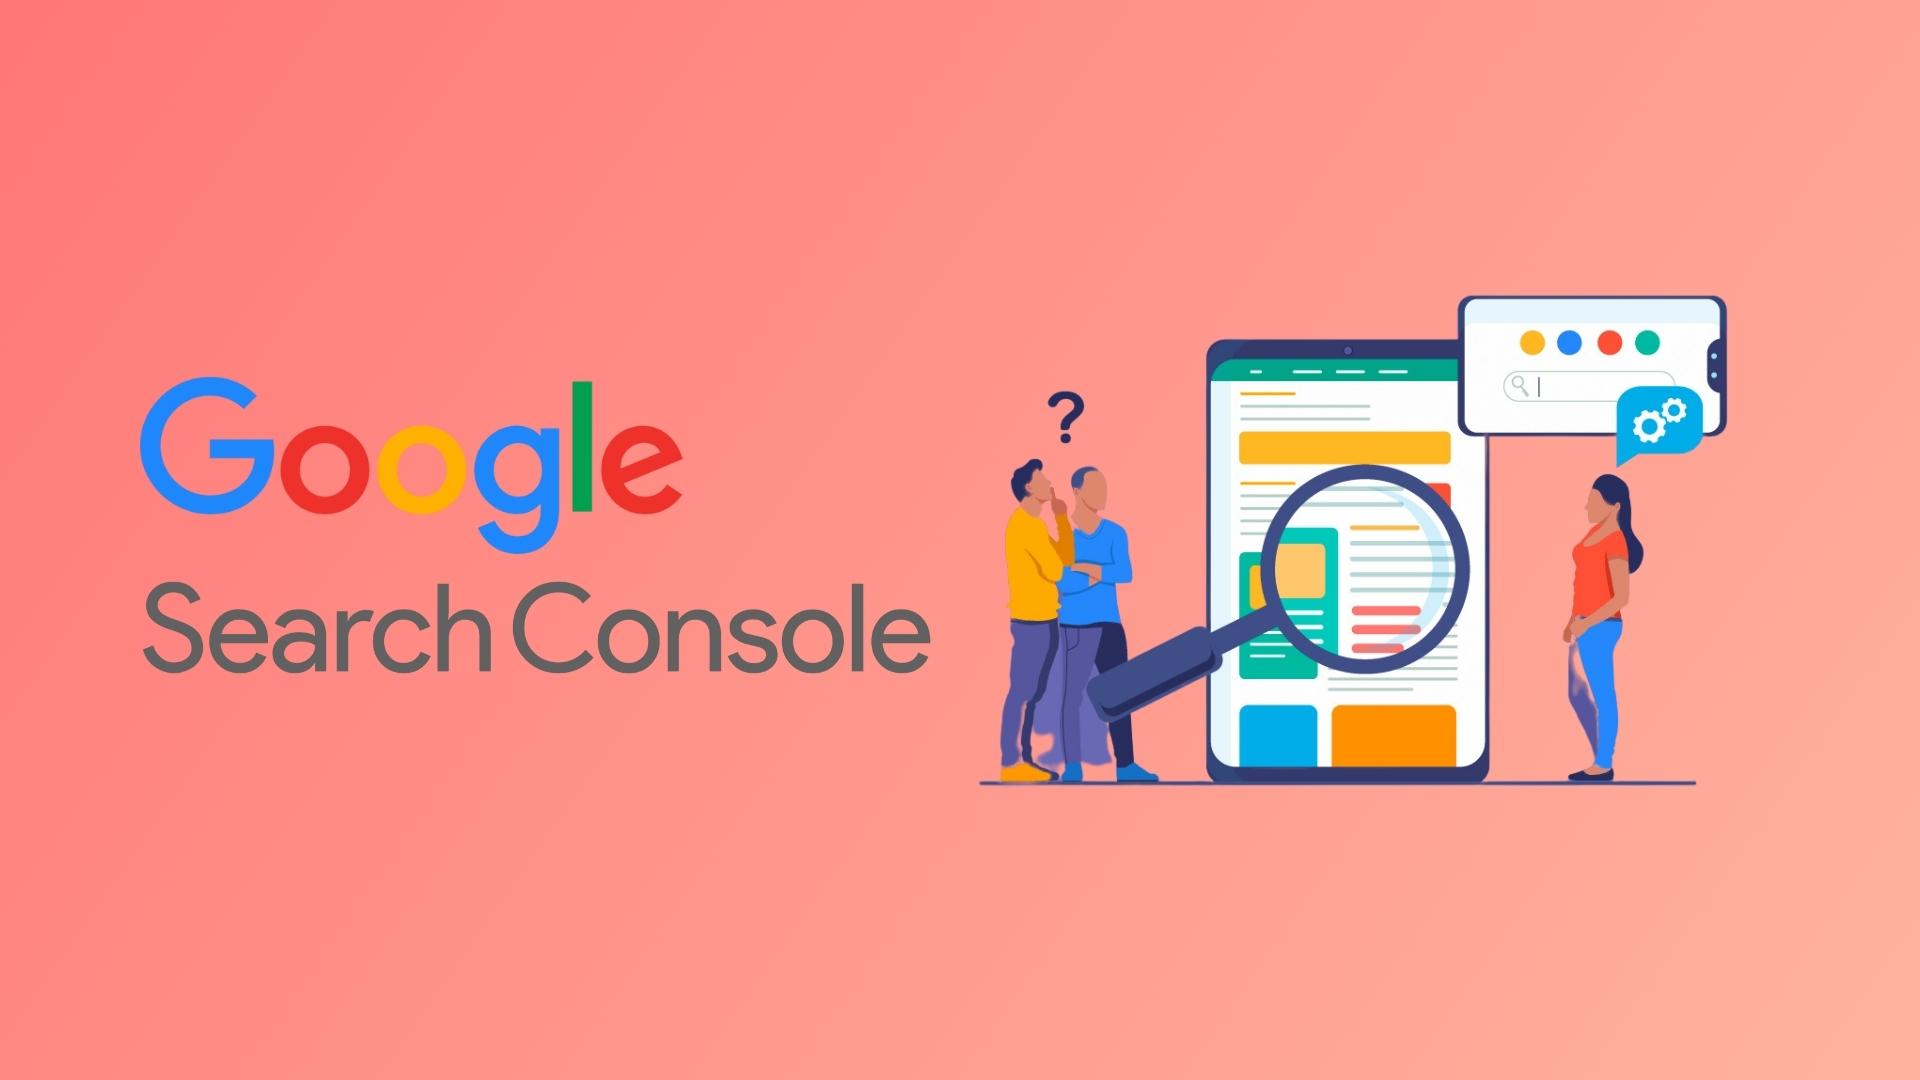 google search console logo icon on the left side and the illustration on the right side as the symbolize of google search console setup service